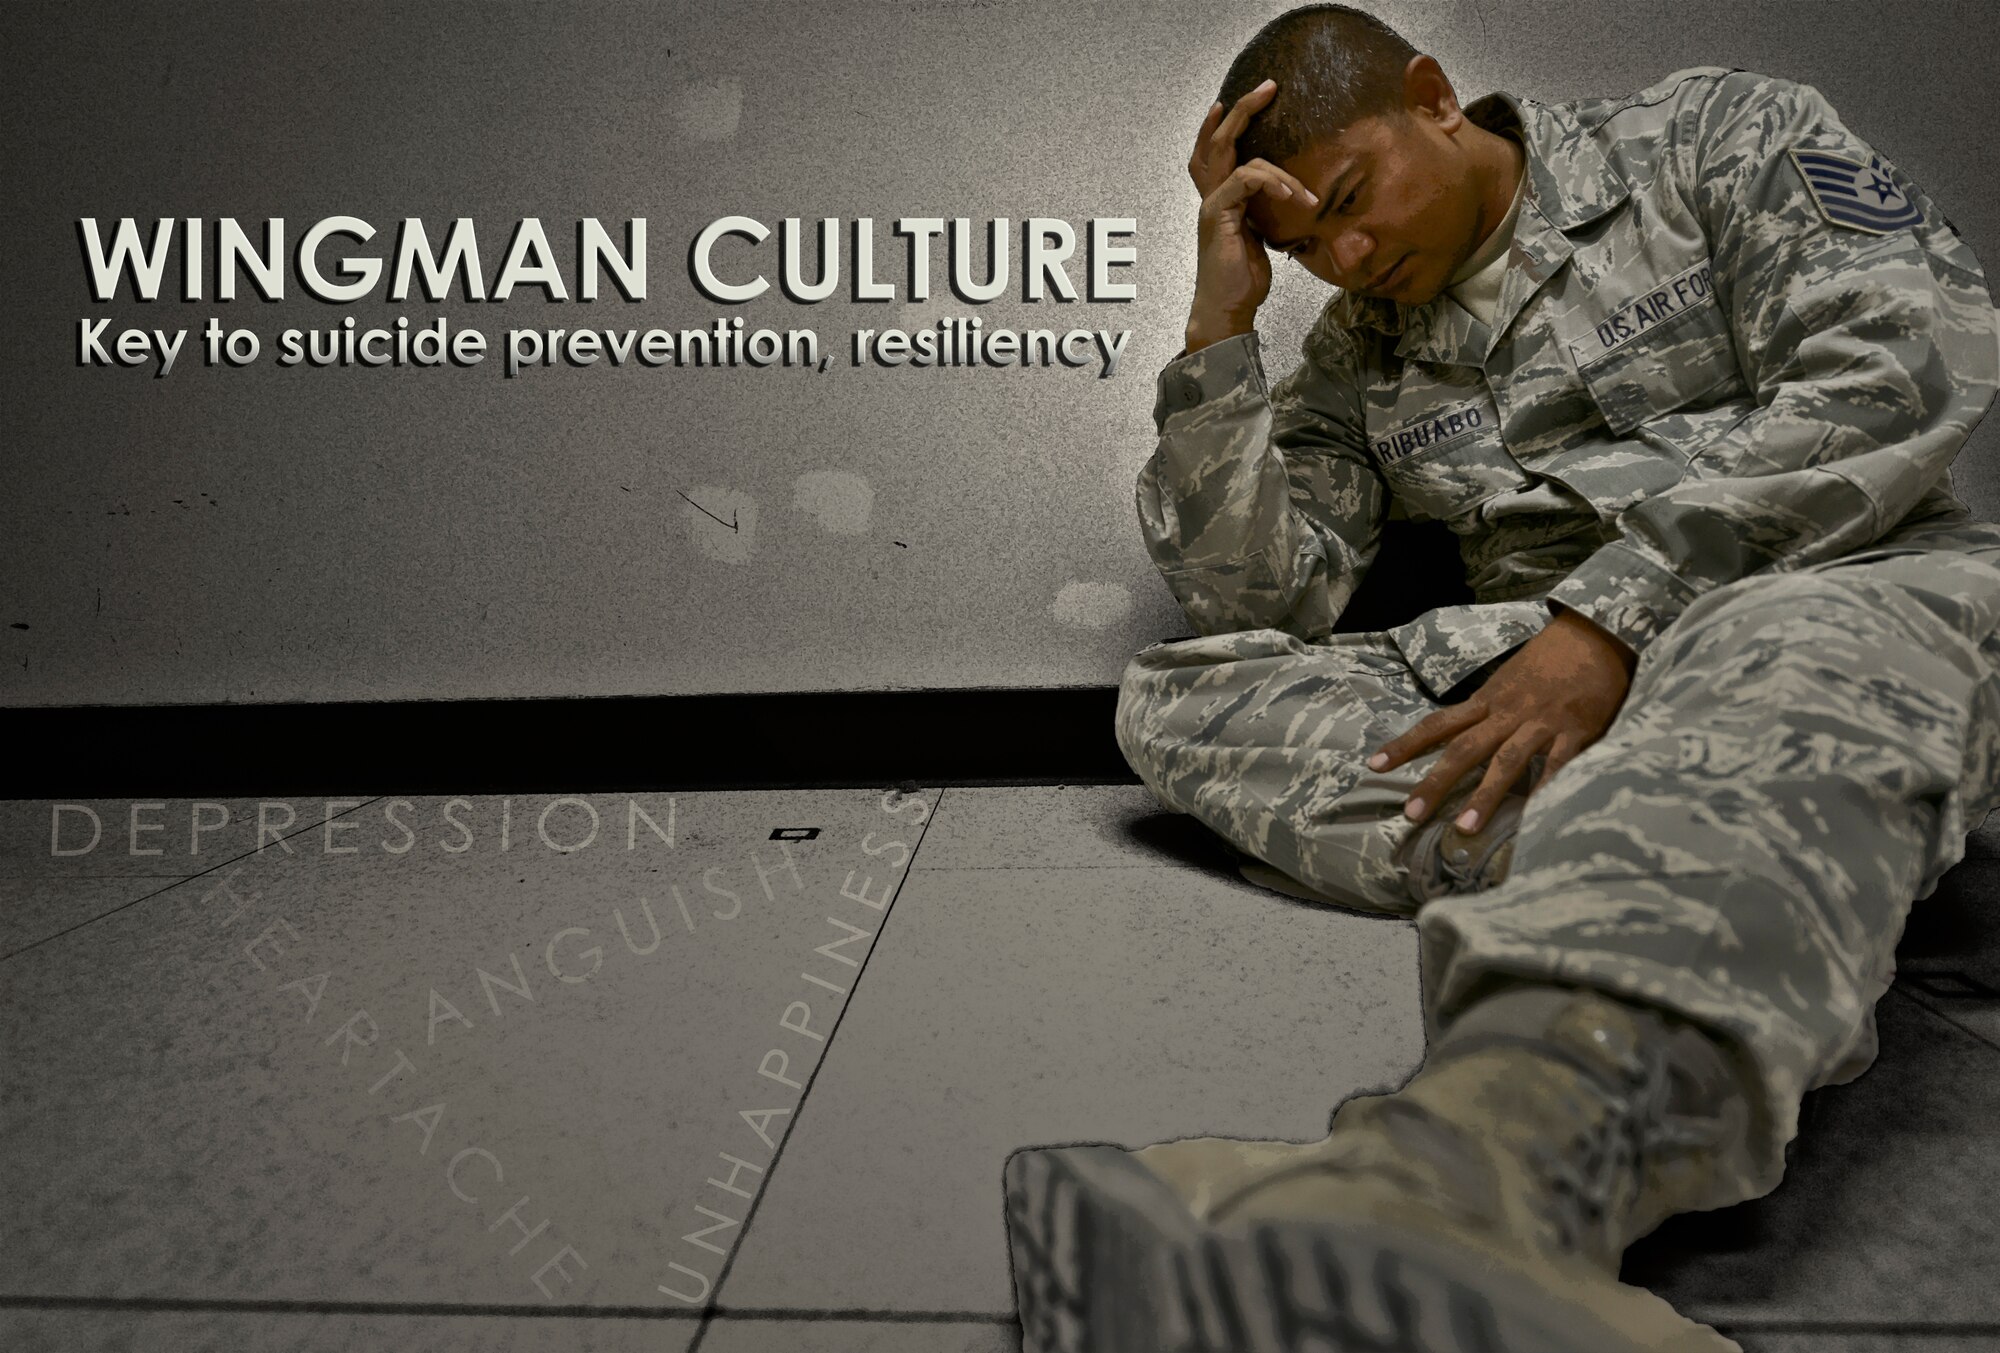 Resiliency is a term describing skill sets for Airmen to bounce back and grow following adversity. The Wingman Culture strengthens Airmen by providing them the tools and support to face the challenges of military life, especially while deployed. (U.S. Air Force photo illustration/Staff Sgt. Benjamin W. Stratton)